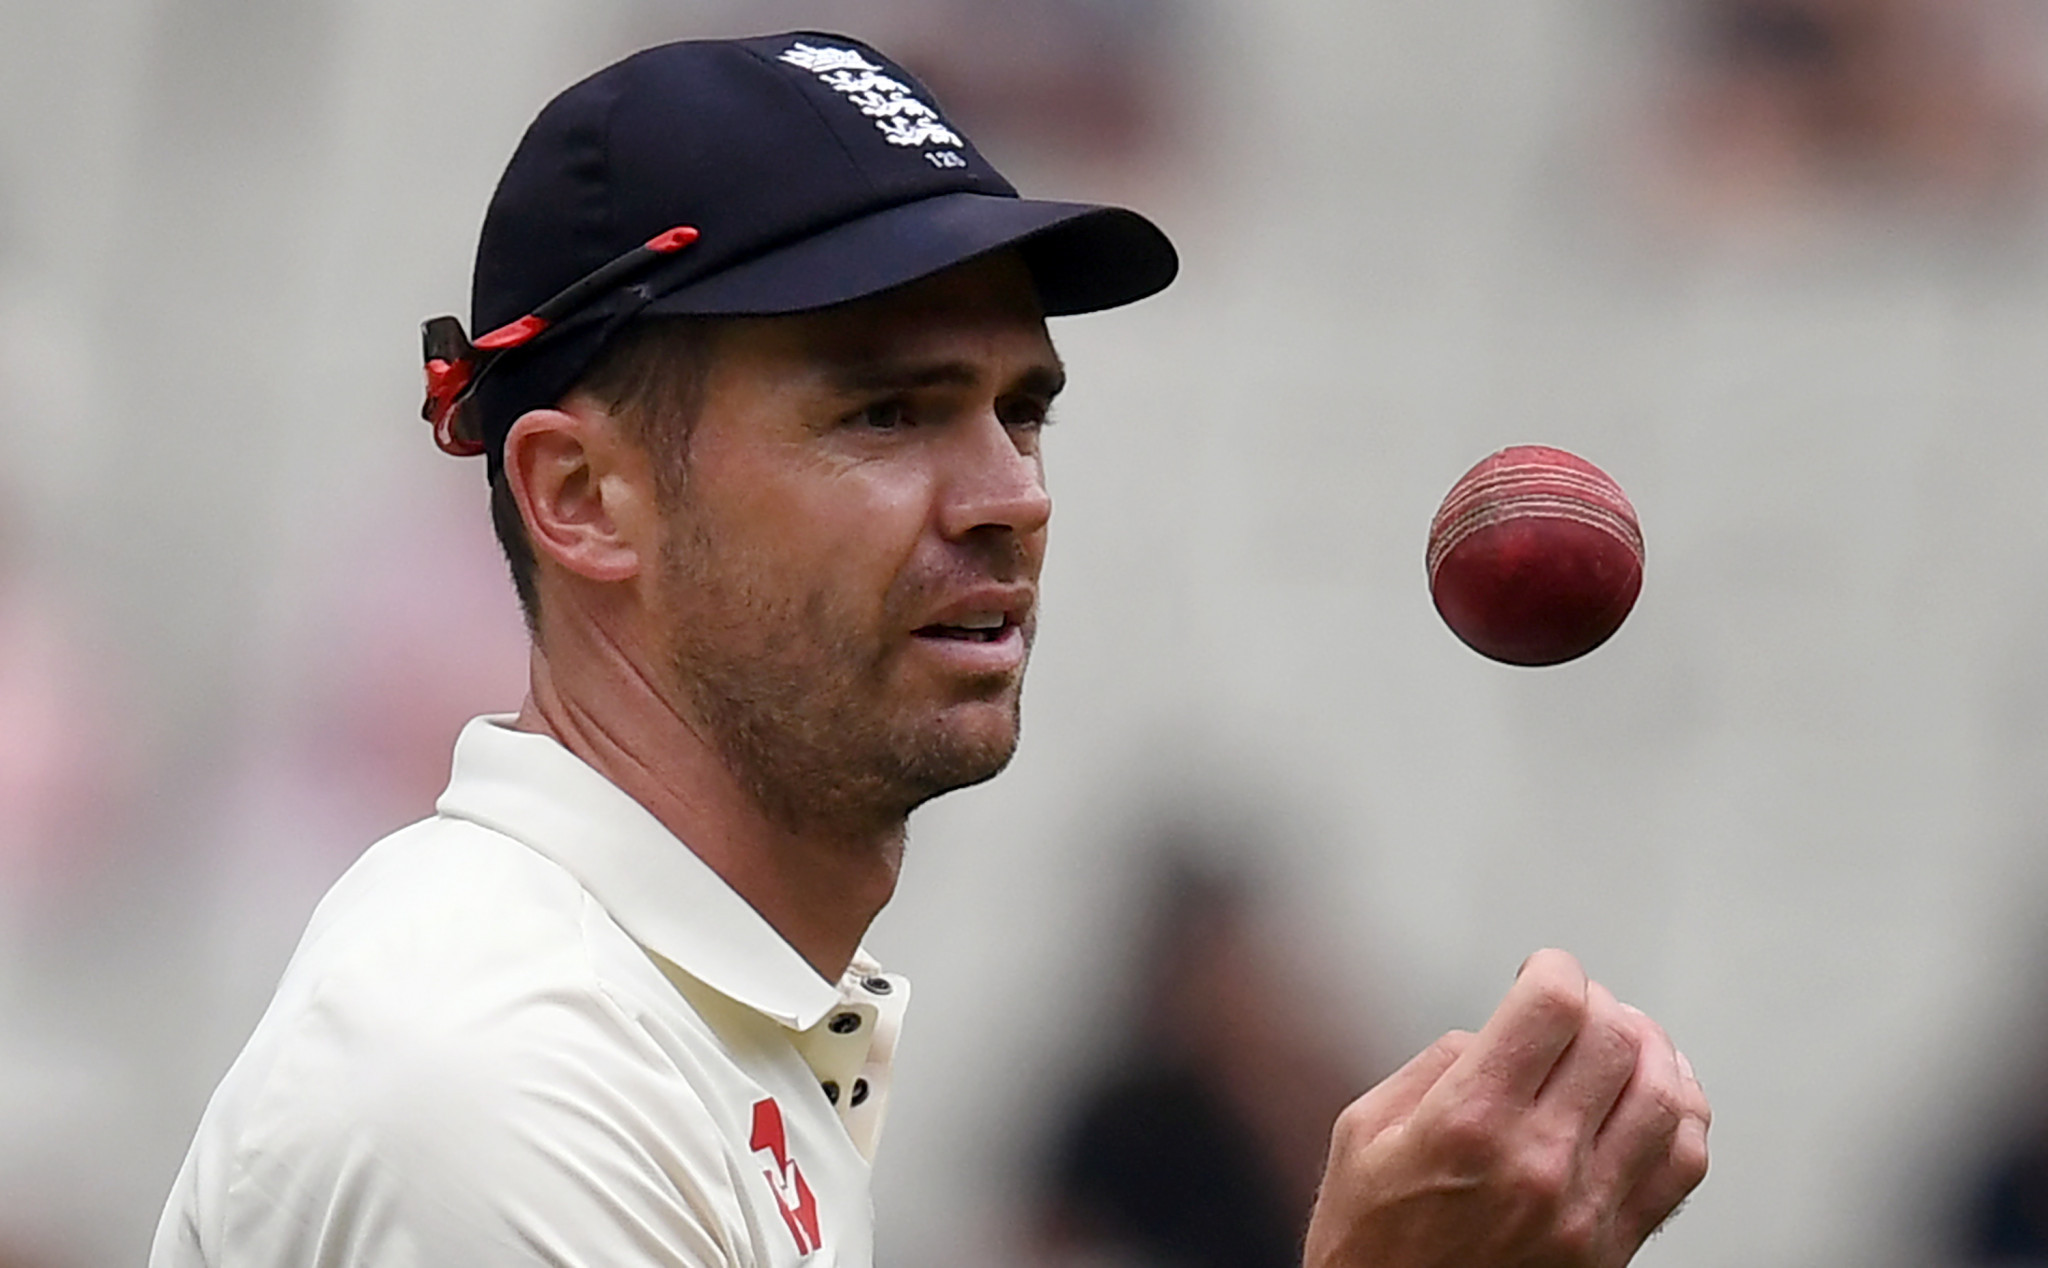 England's James Anderson was accused of tampering with the ball during the fourth Ashes Test in Melbourne ©Getty Images